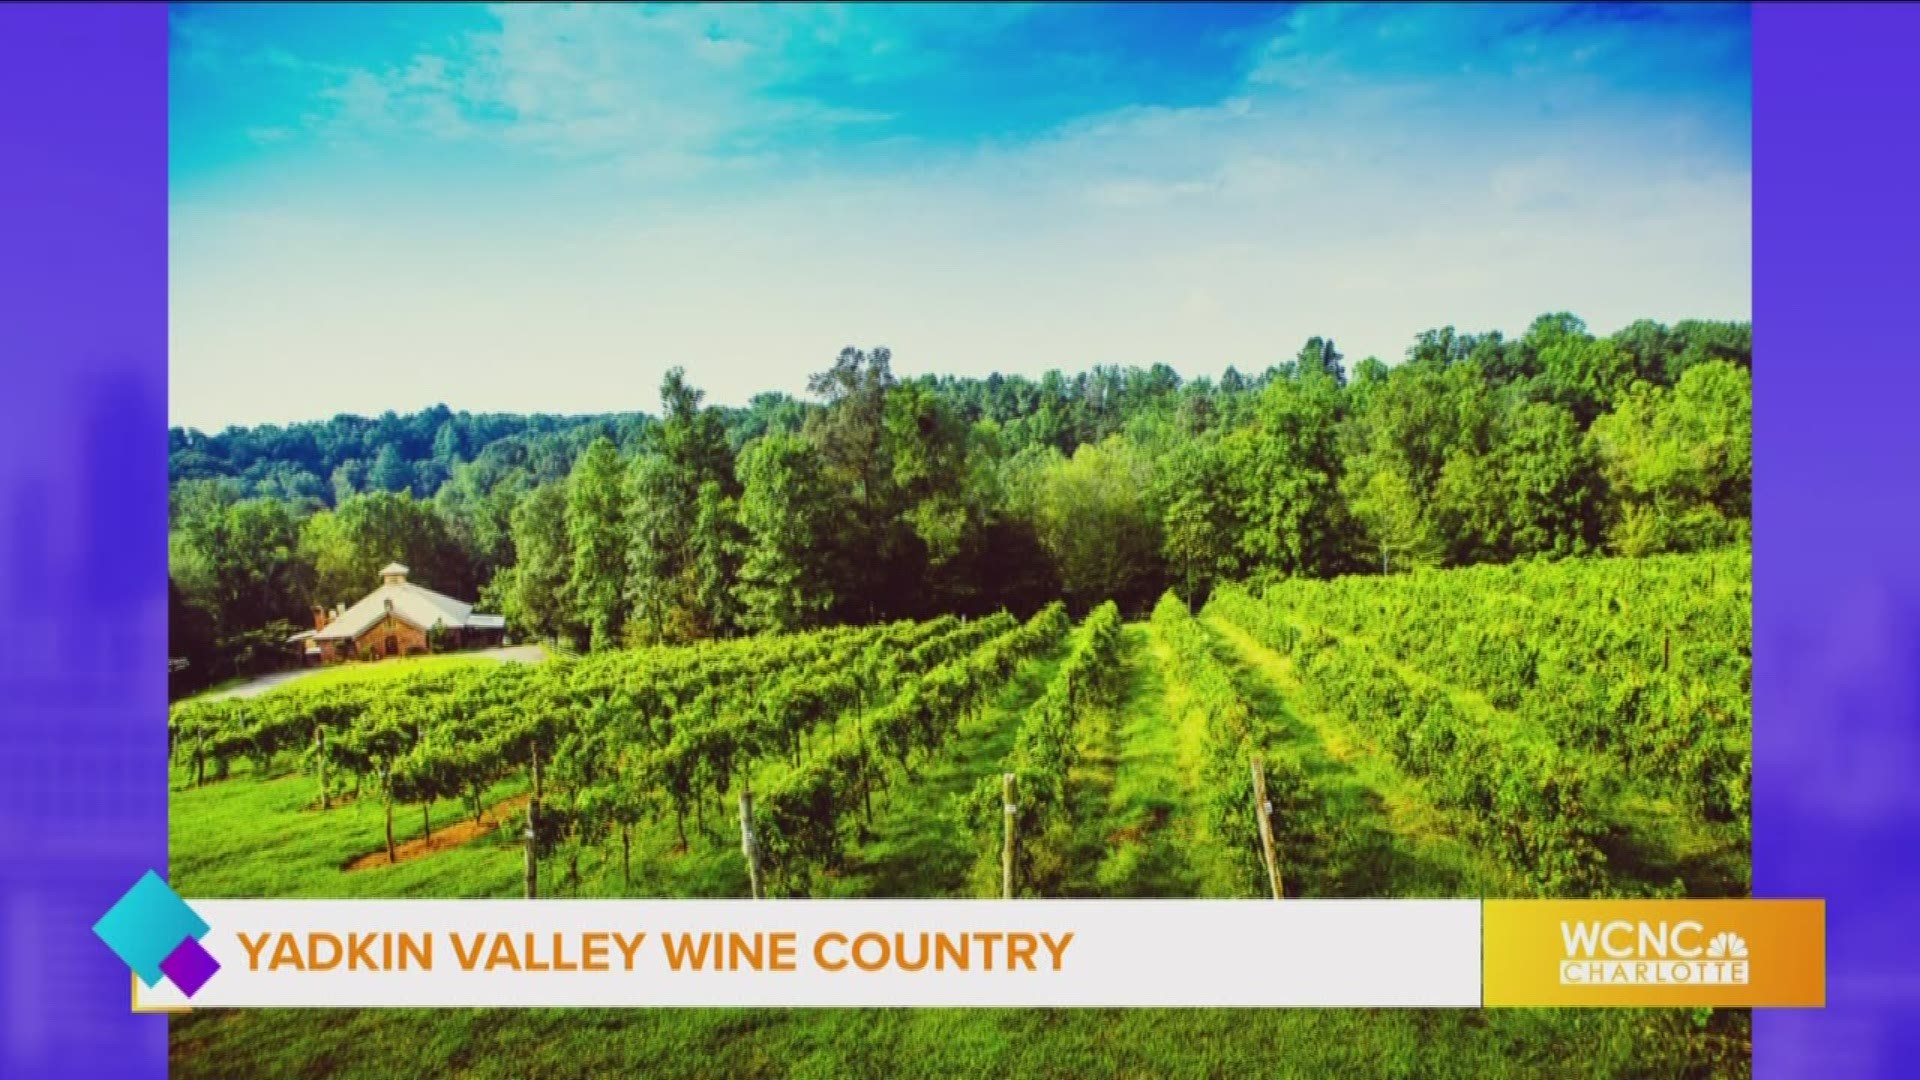 Explore the Surry County Wine Trail in Yadkin Valley Wine Country.